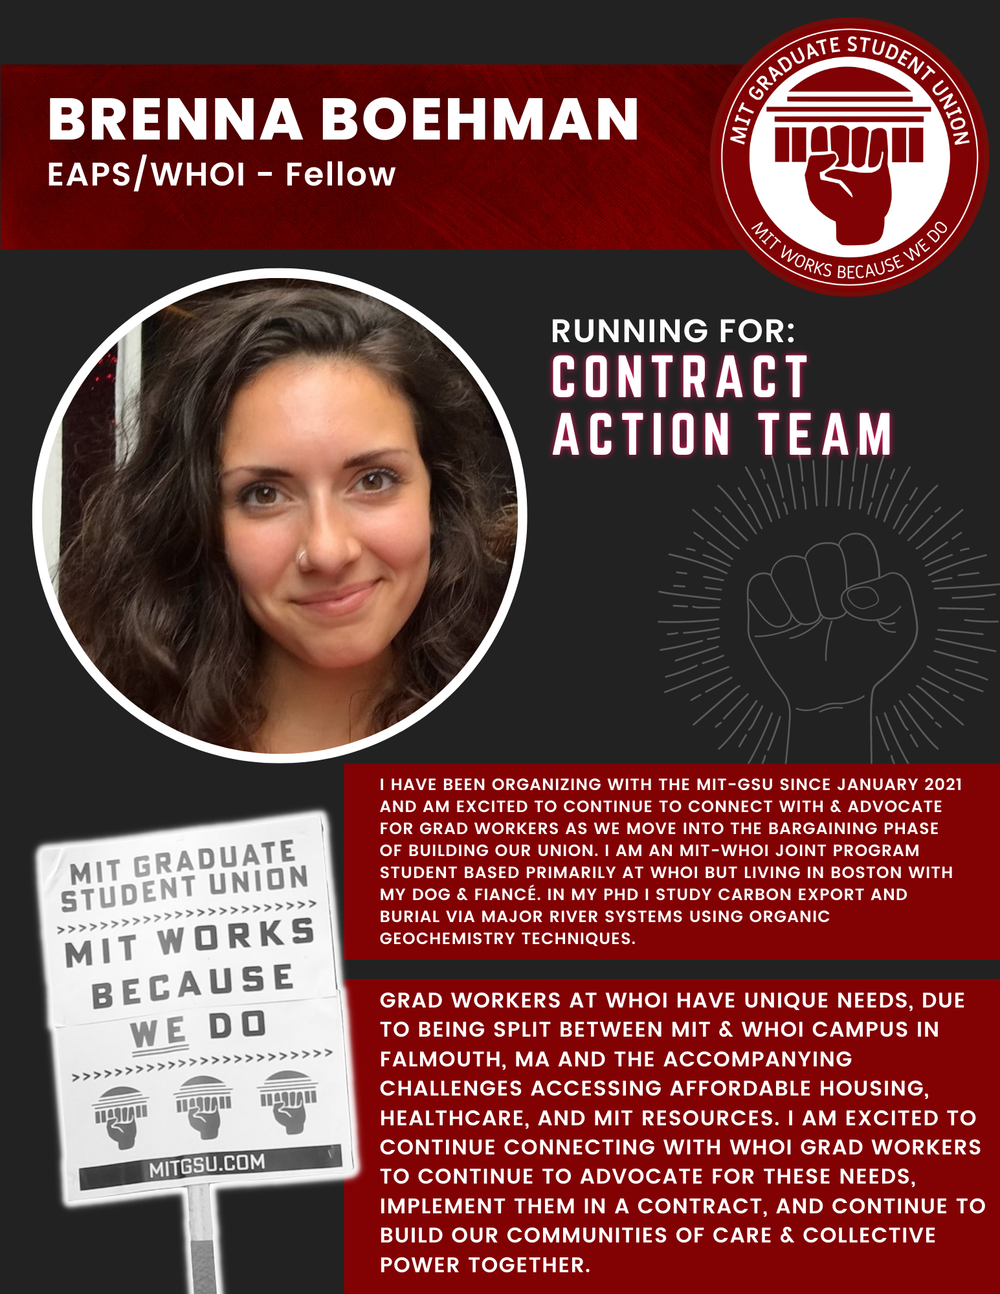  BRENNA BOEHMAN EAPS/WHOI - Fellow   RUNNING FOR: Contract Action Team  I HAVE BEEN ORGANIZING WITH THE MIT-GSU SINCE JANUARY 2021  AND AM EXCITED TO CONTINUE TO CONNECT WITH &amp; ADVOCATE FOR GRAD WORKERS AS WE MOVE INTO THE BARGAINING PHASE OF BUI